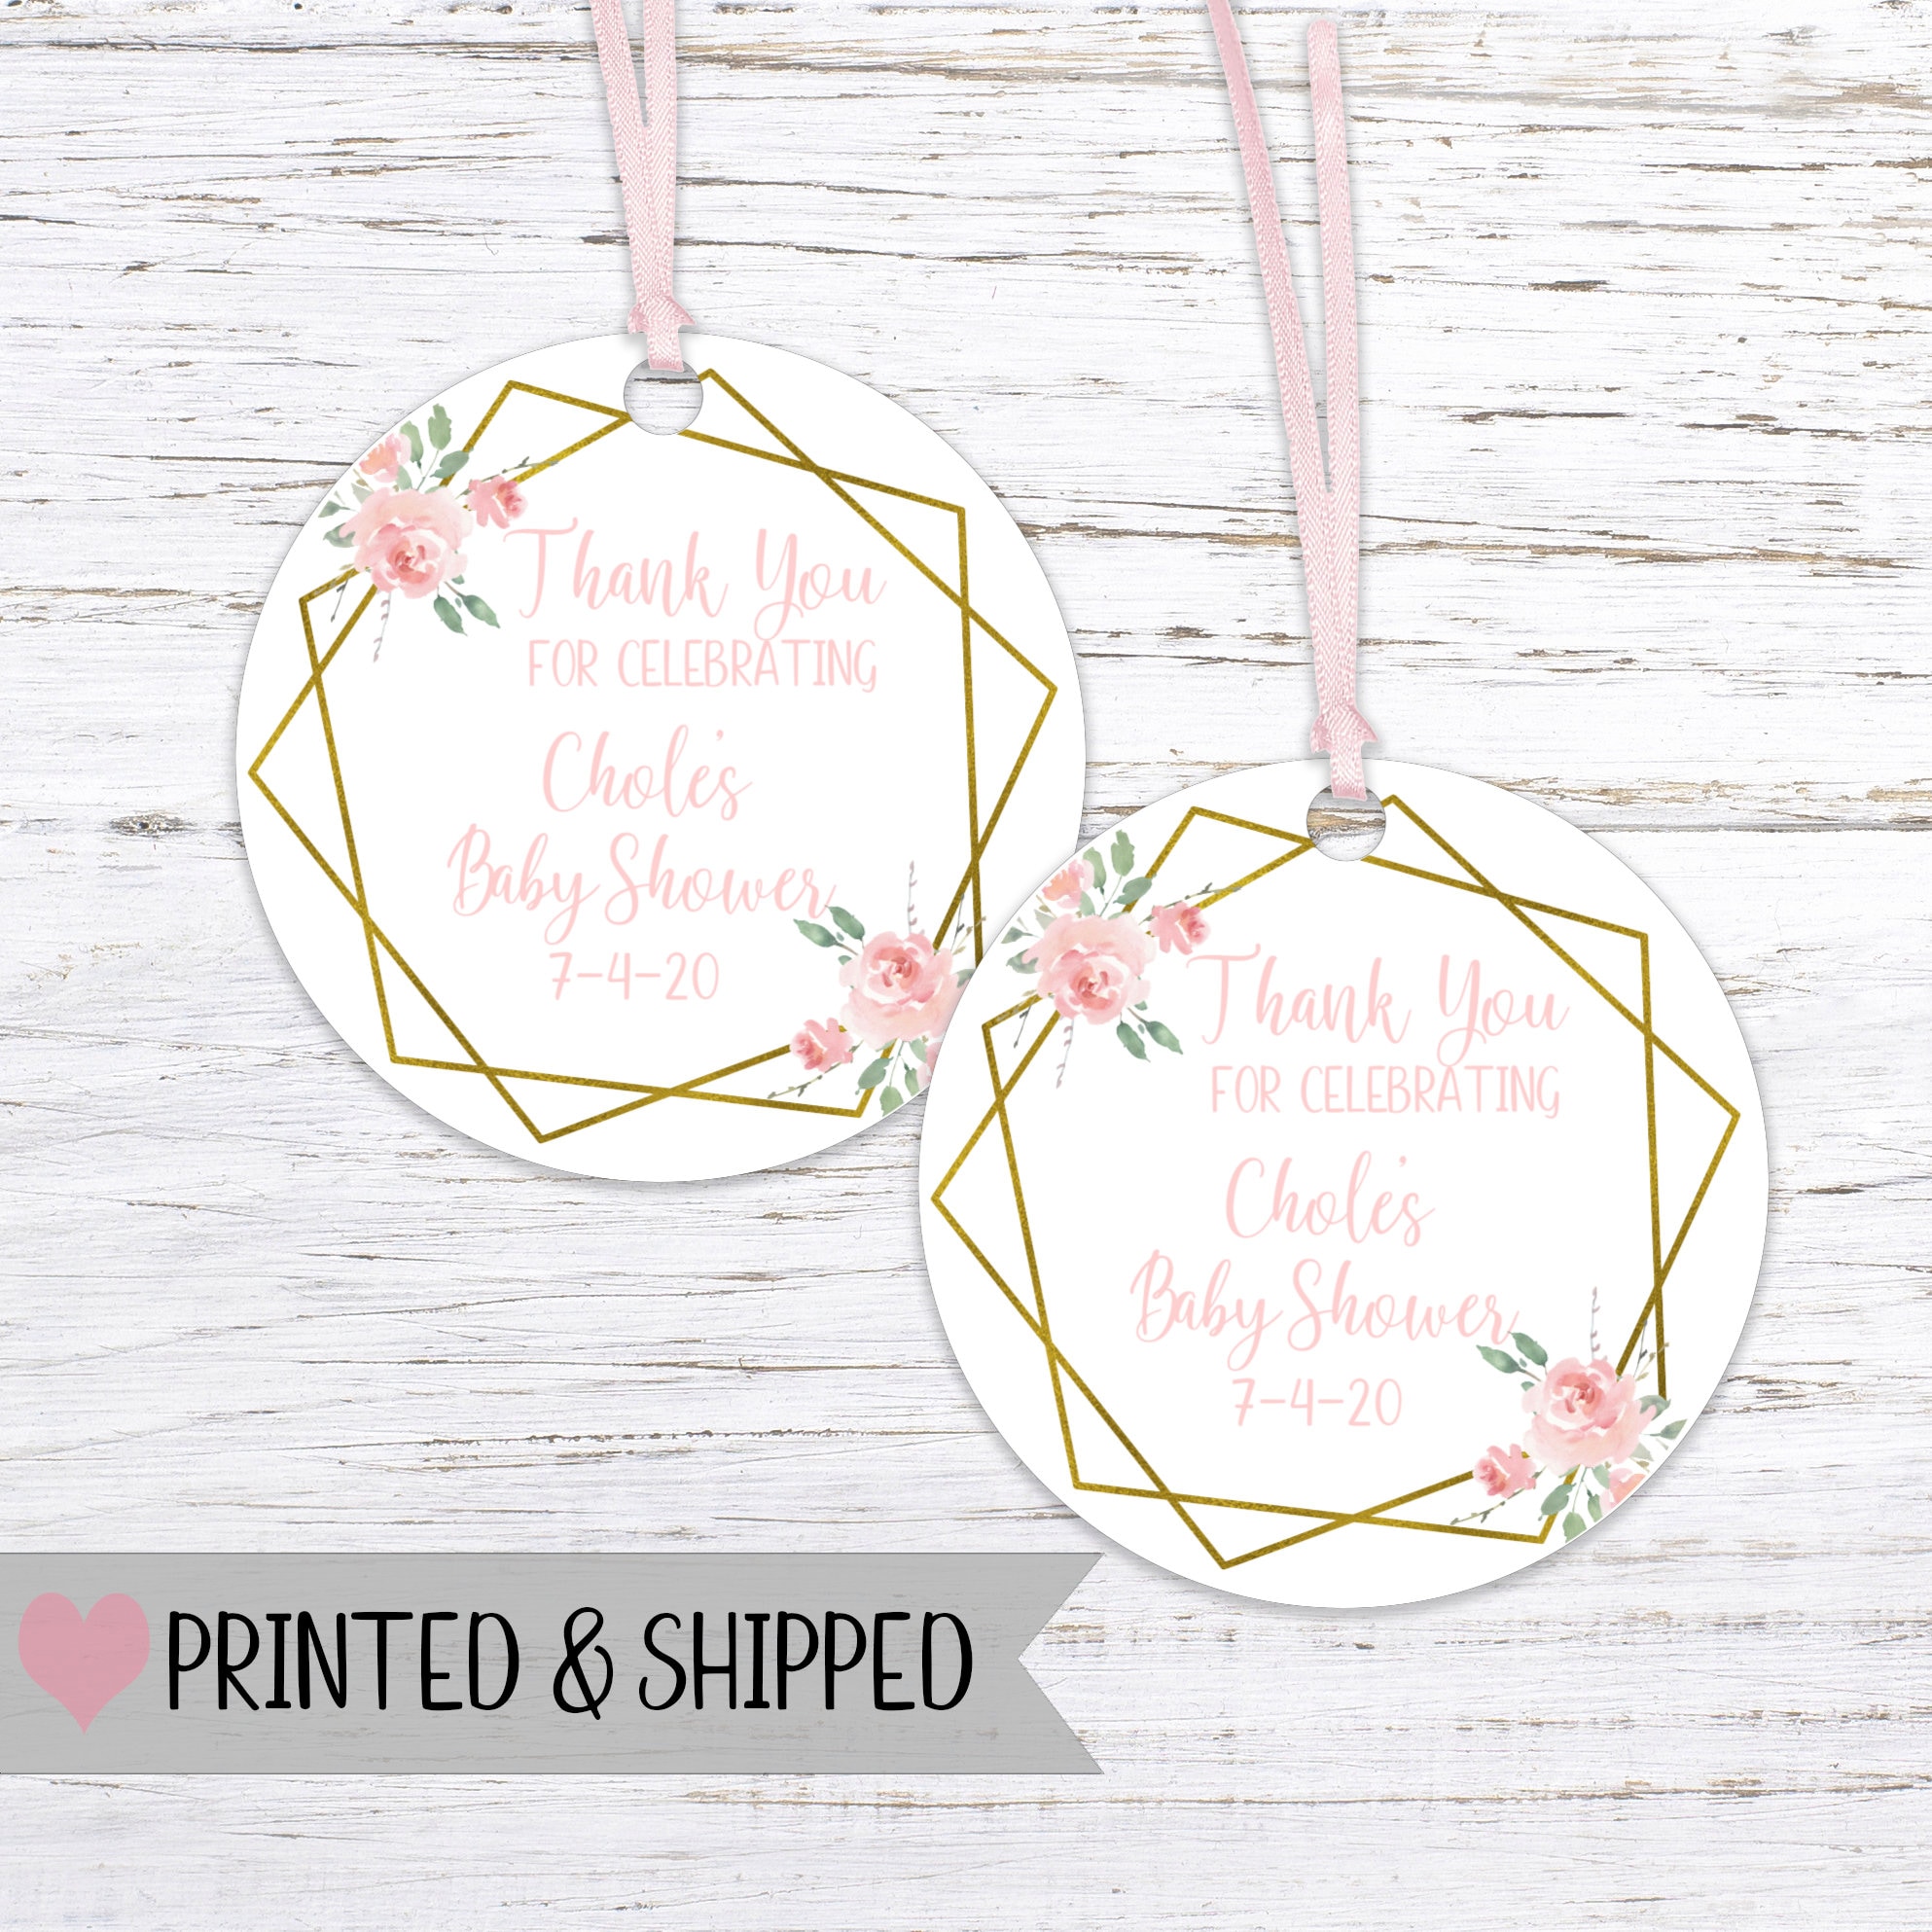 Personalized Gift Tags DEPOSIT Blush and Gold Baby Shower Gift Tags Romantic Wedding Tags Romantic Flourish Favor Tags Favor Tags